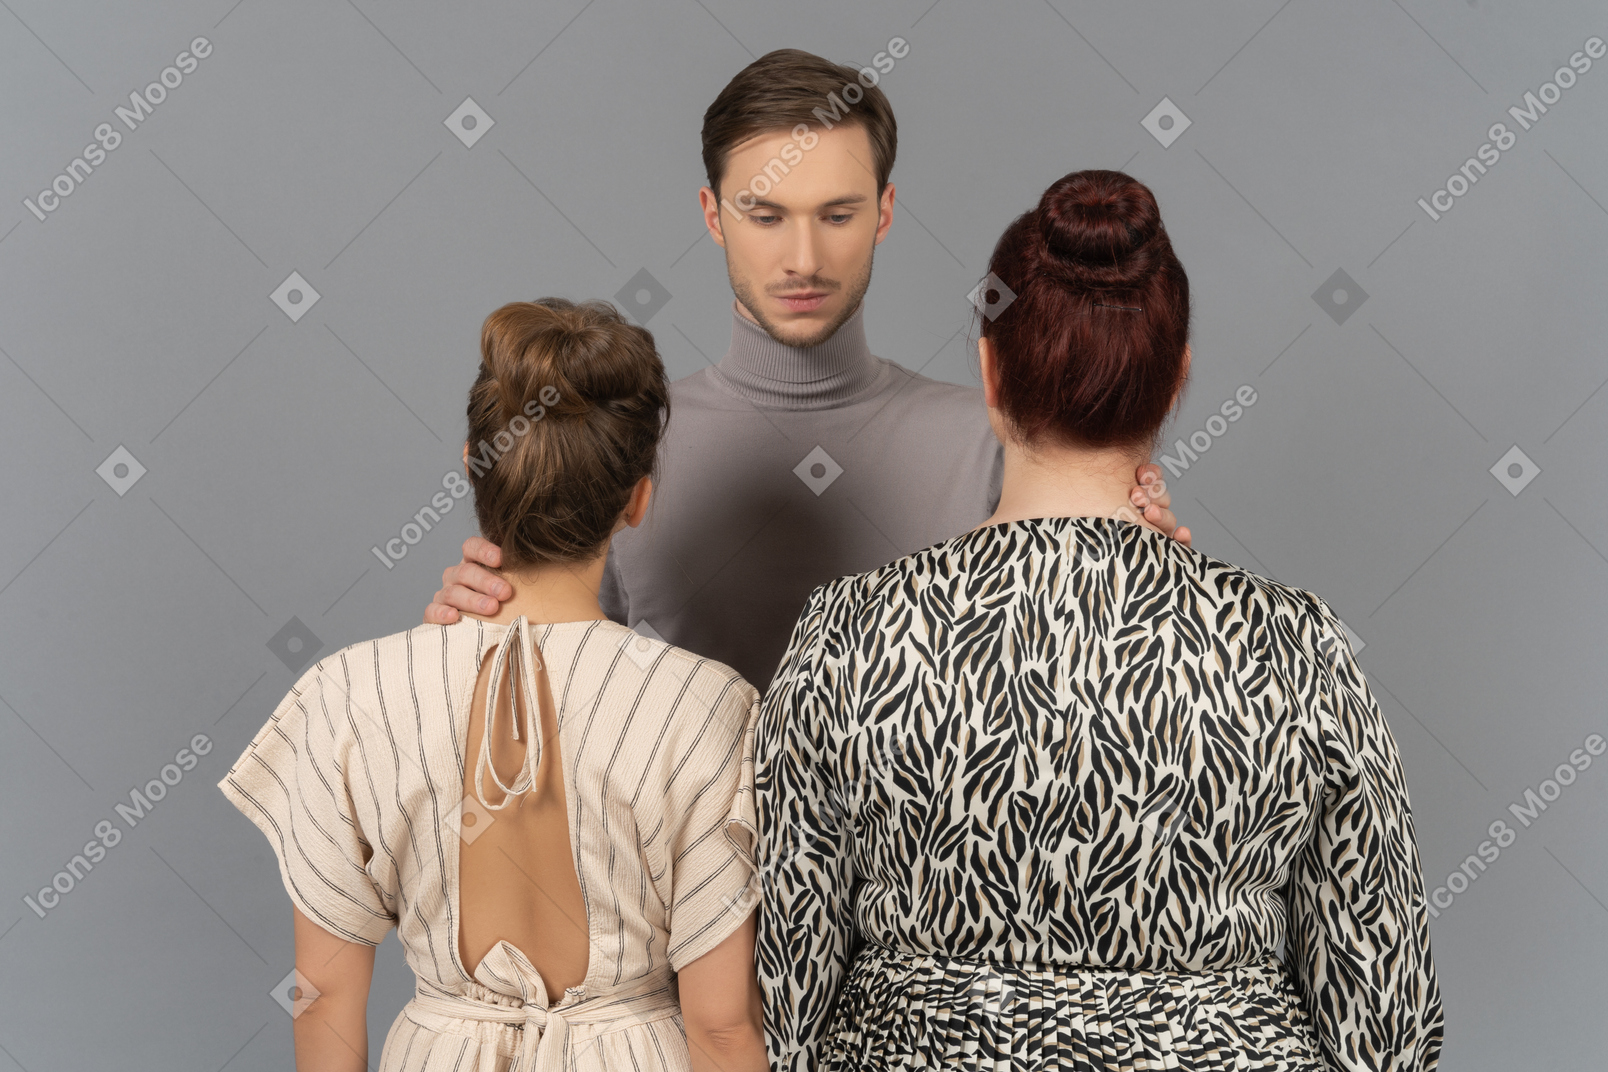 Young man touching necks of two women in front of him